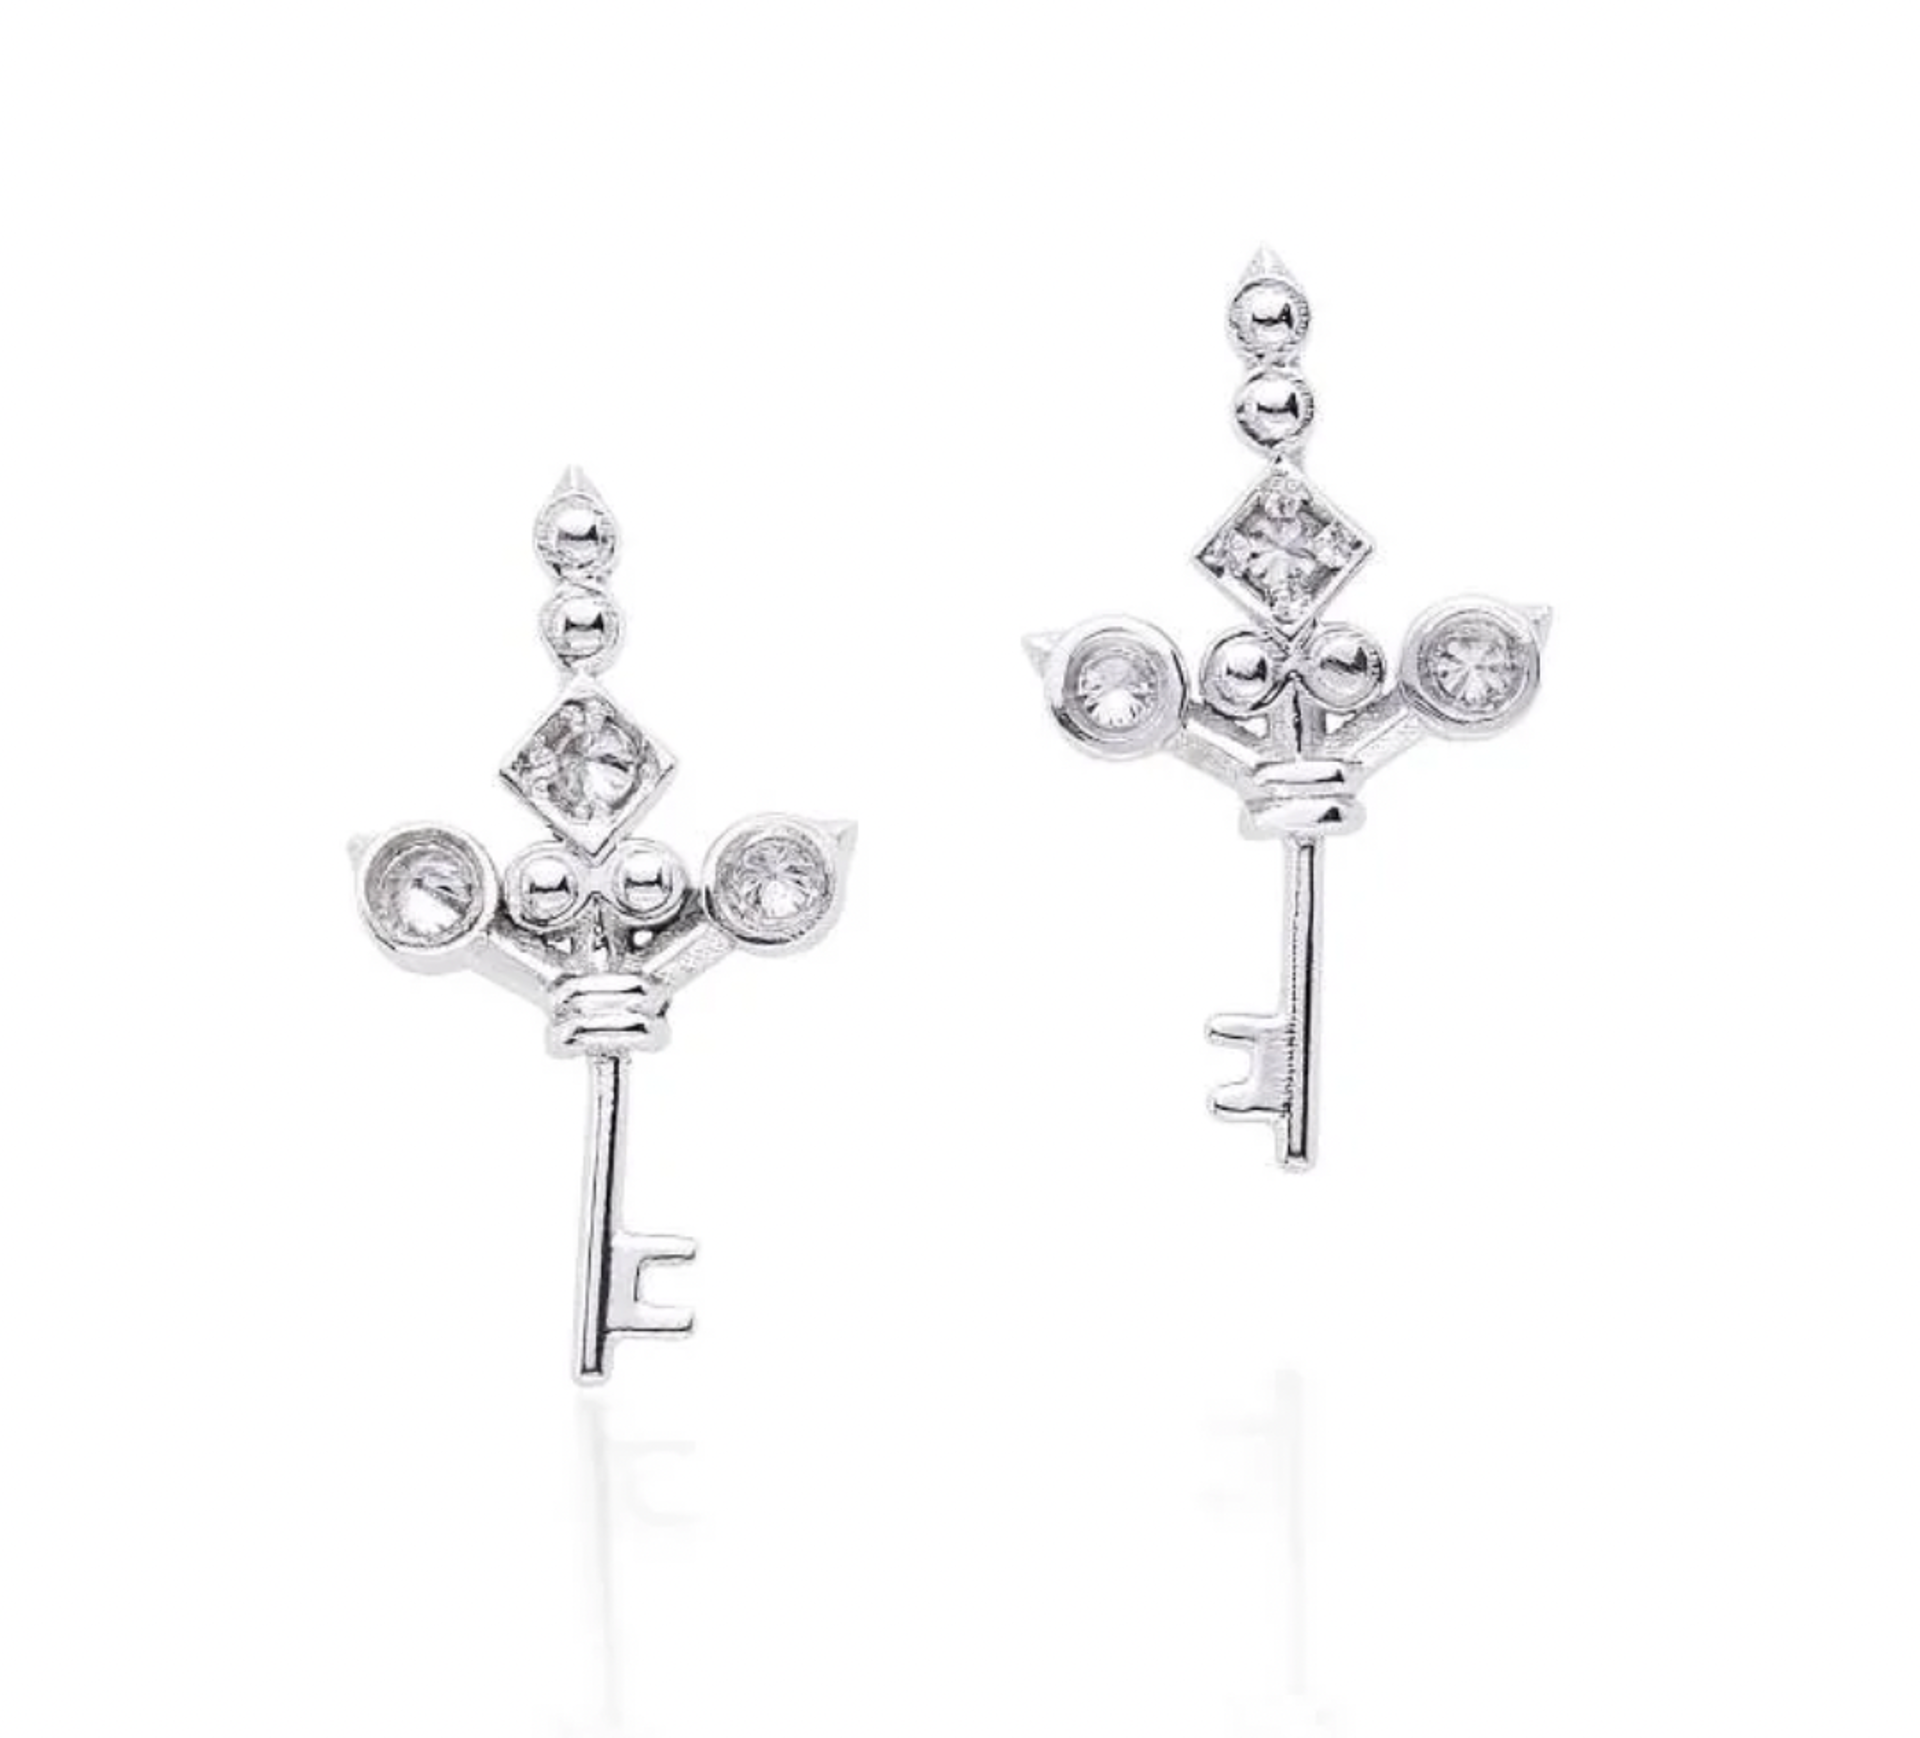 Impeccable Words White Gold Love Key Studs by Ana Katarina